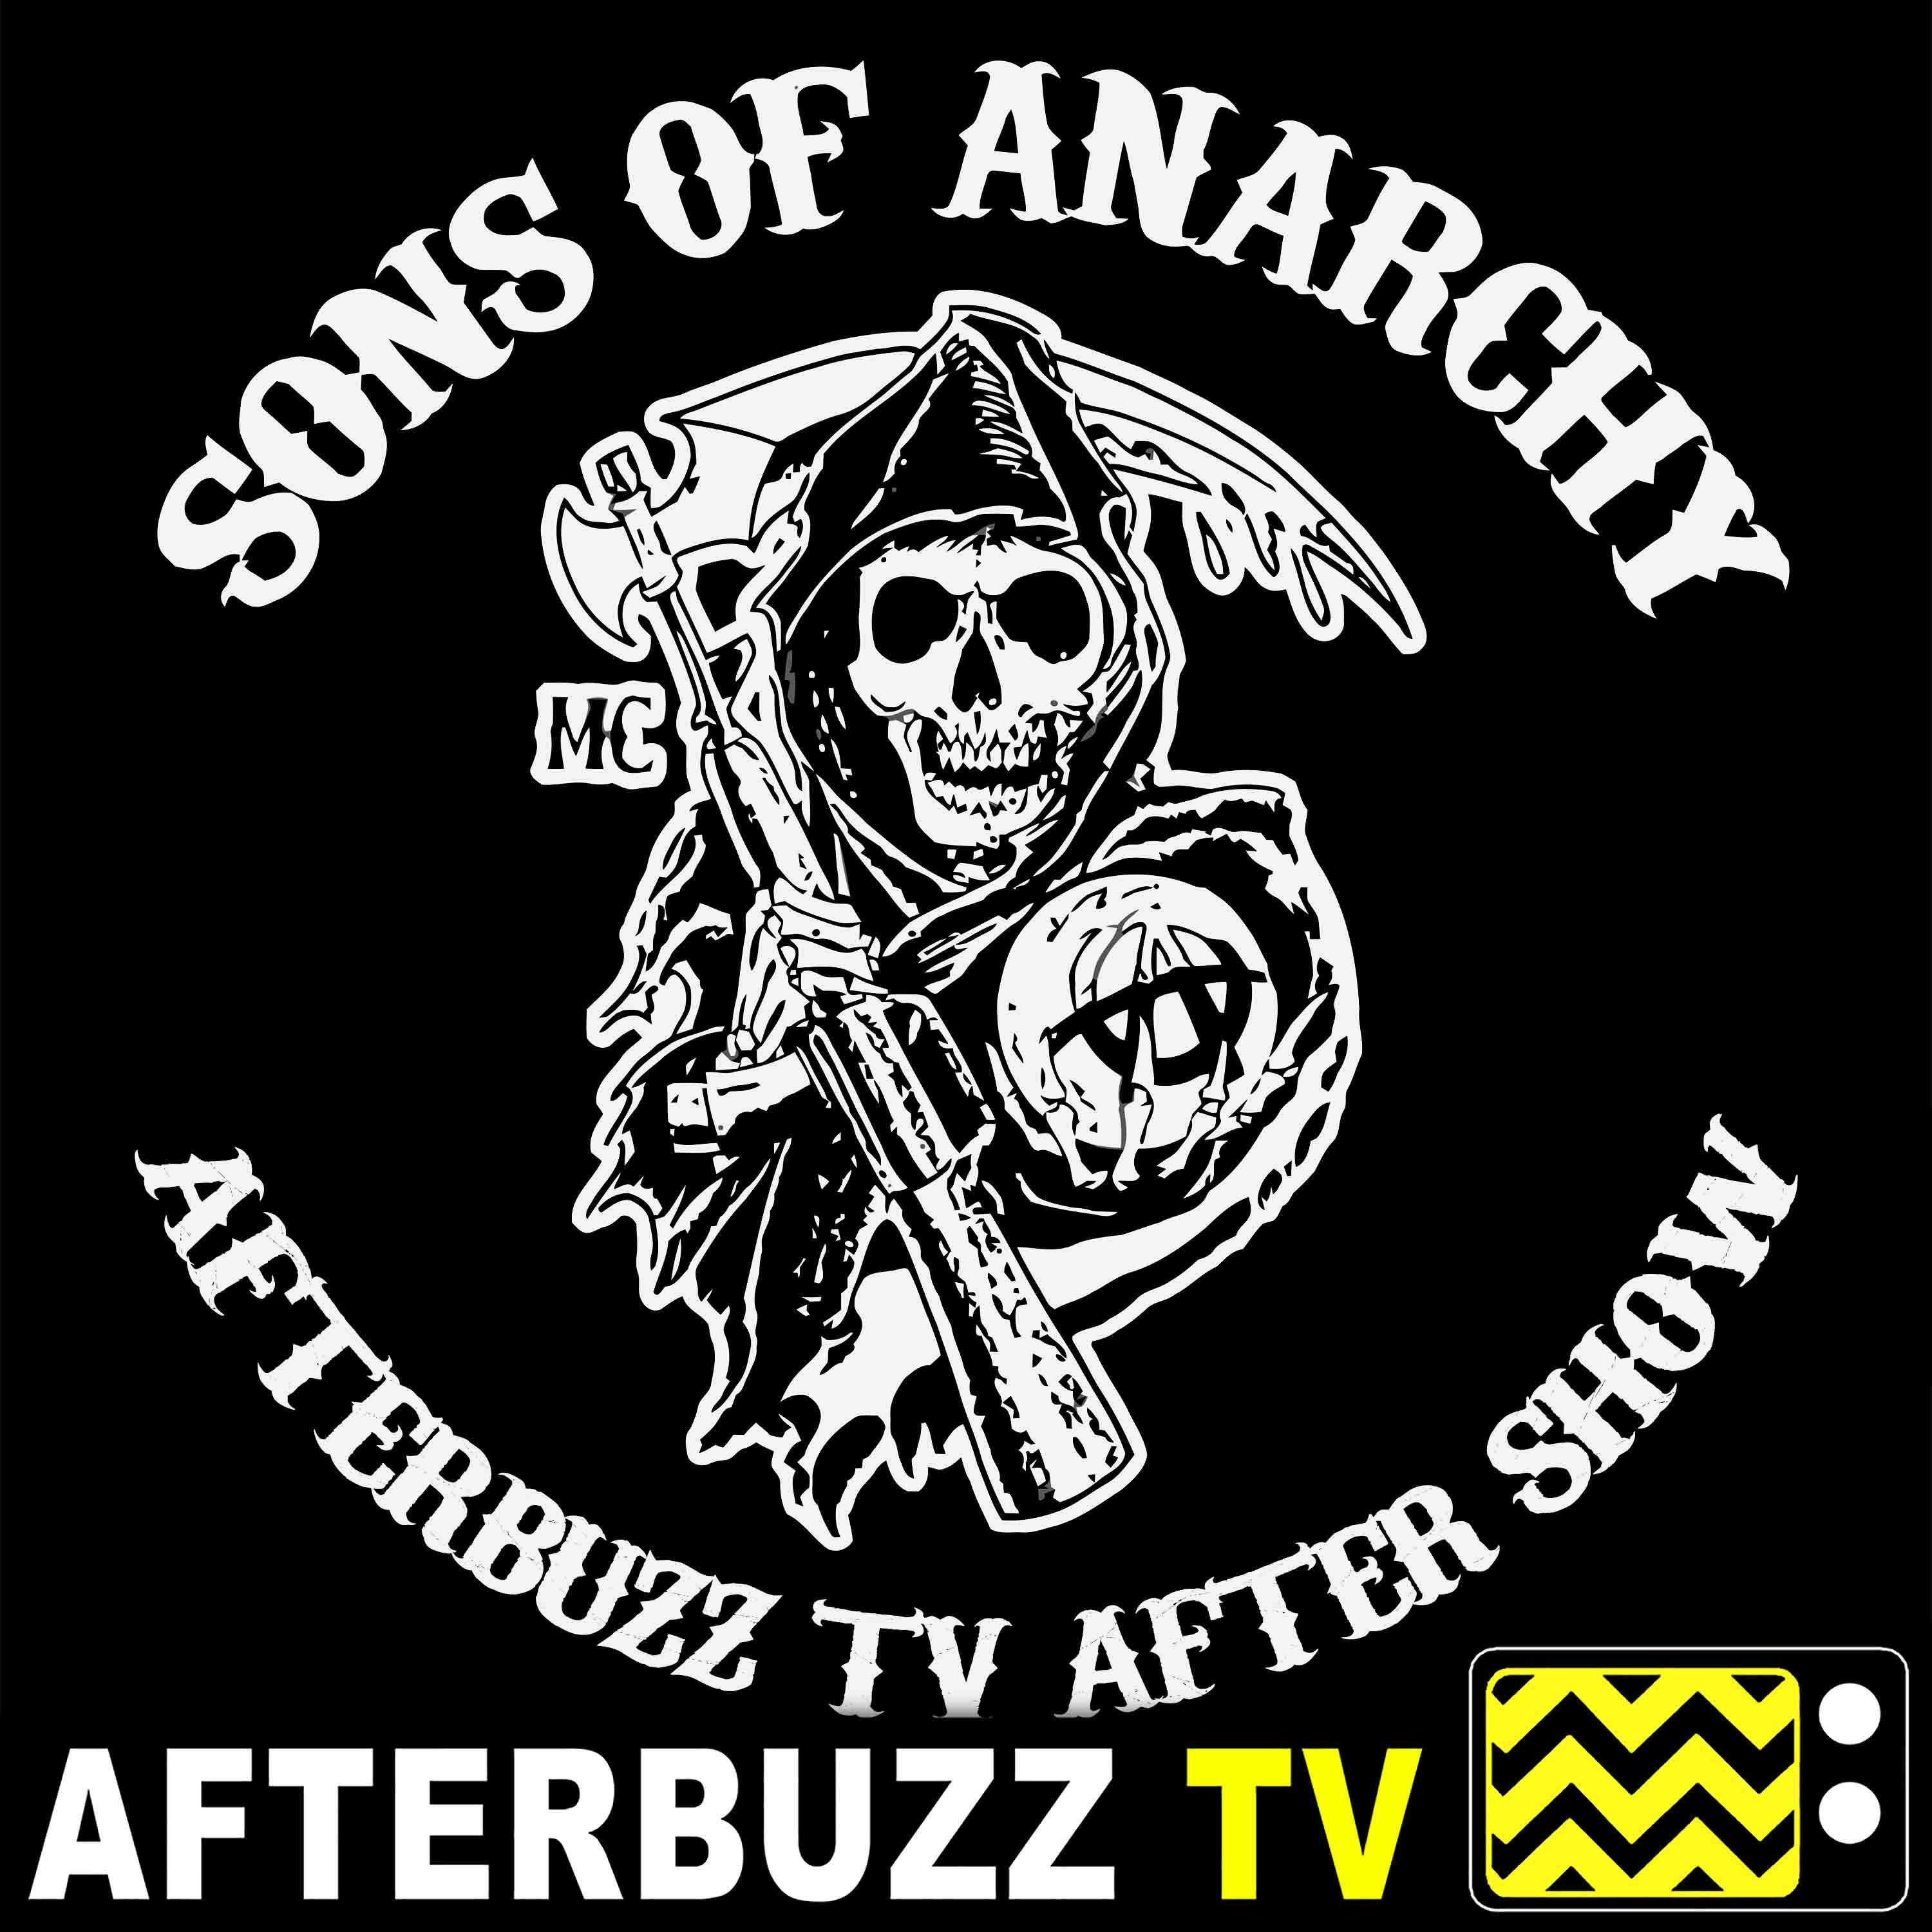 Sons of Anarchy S:7 | Some Strange Eruption E:5 | AfterBuzz TV AfterShow